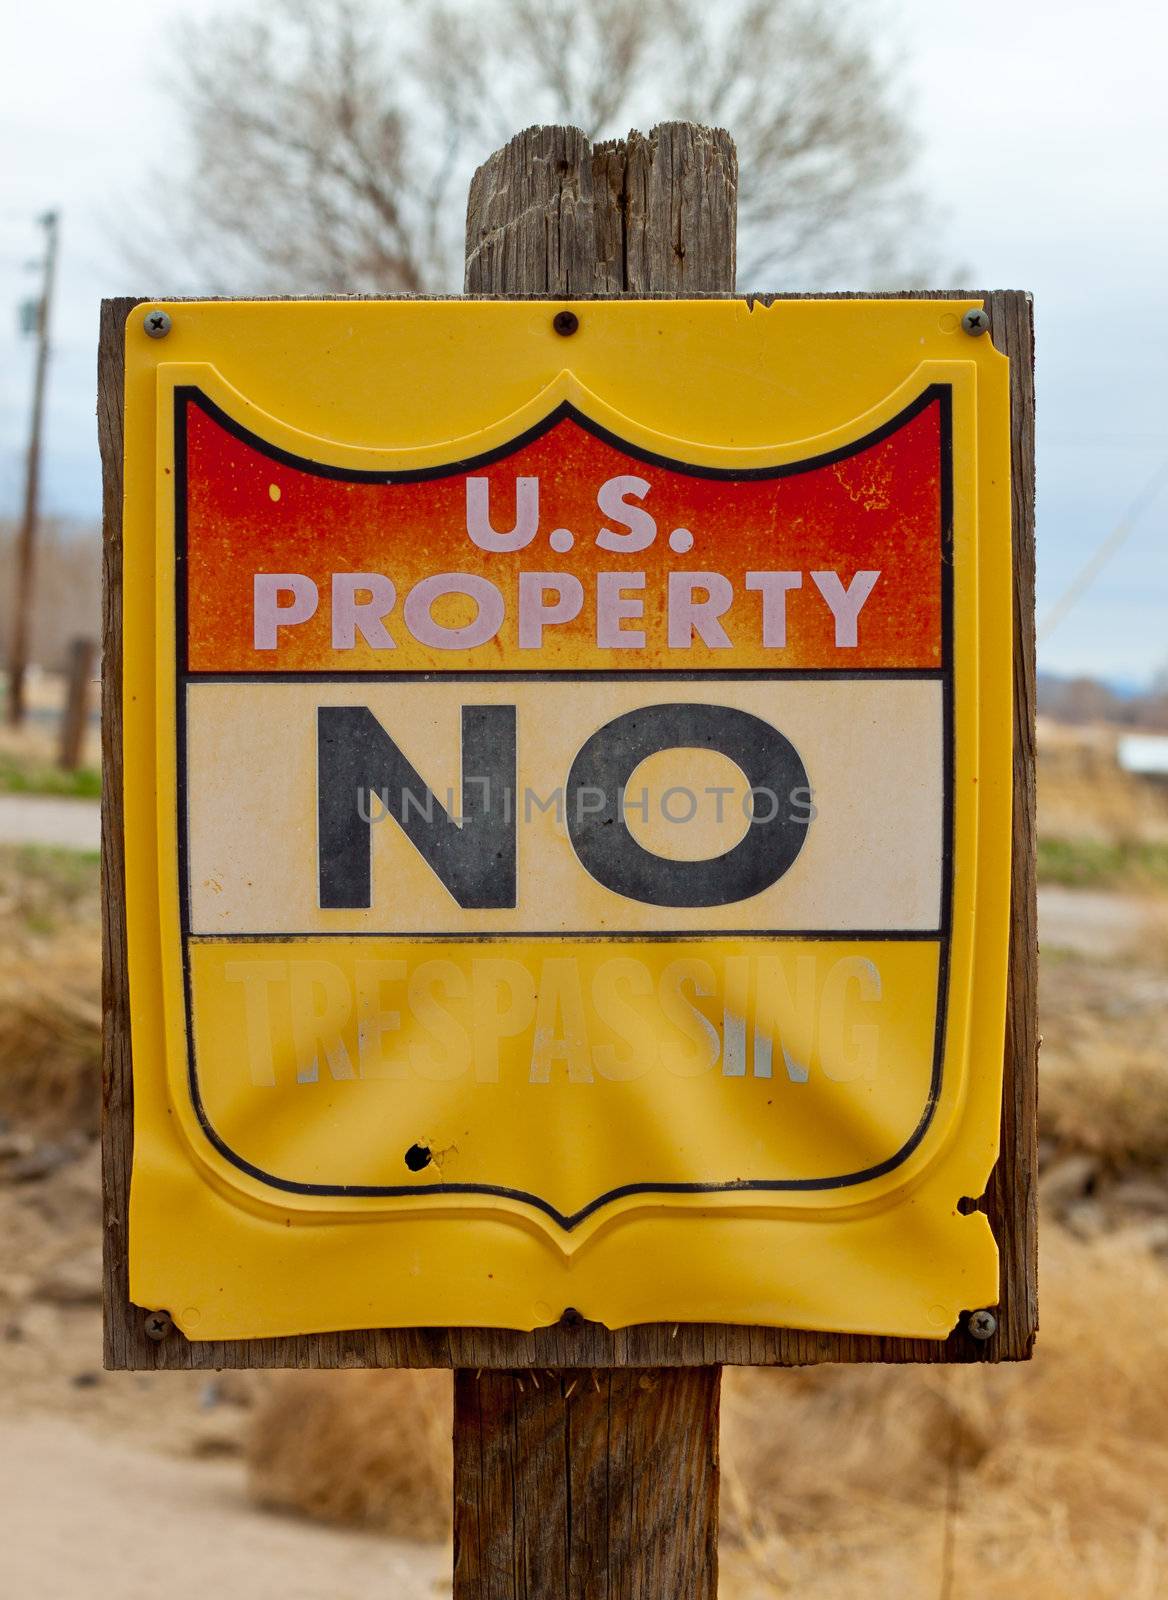 A photograph of an old U.S. Property NO TRESPASSING sign.